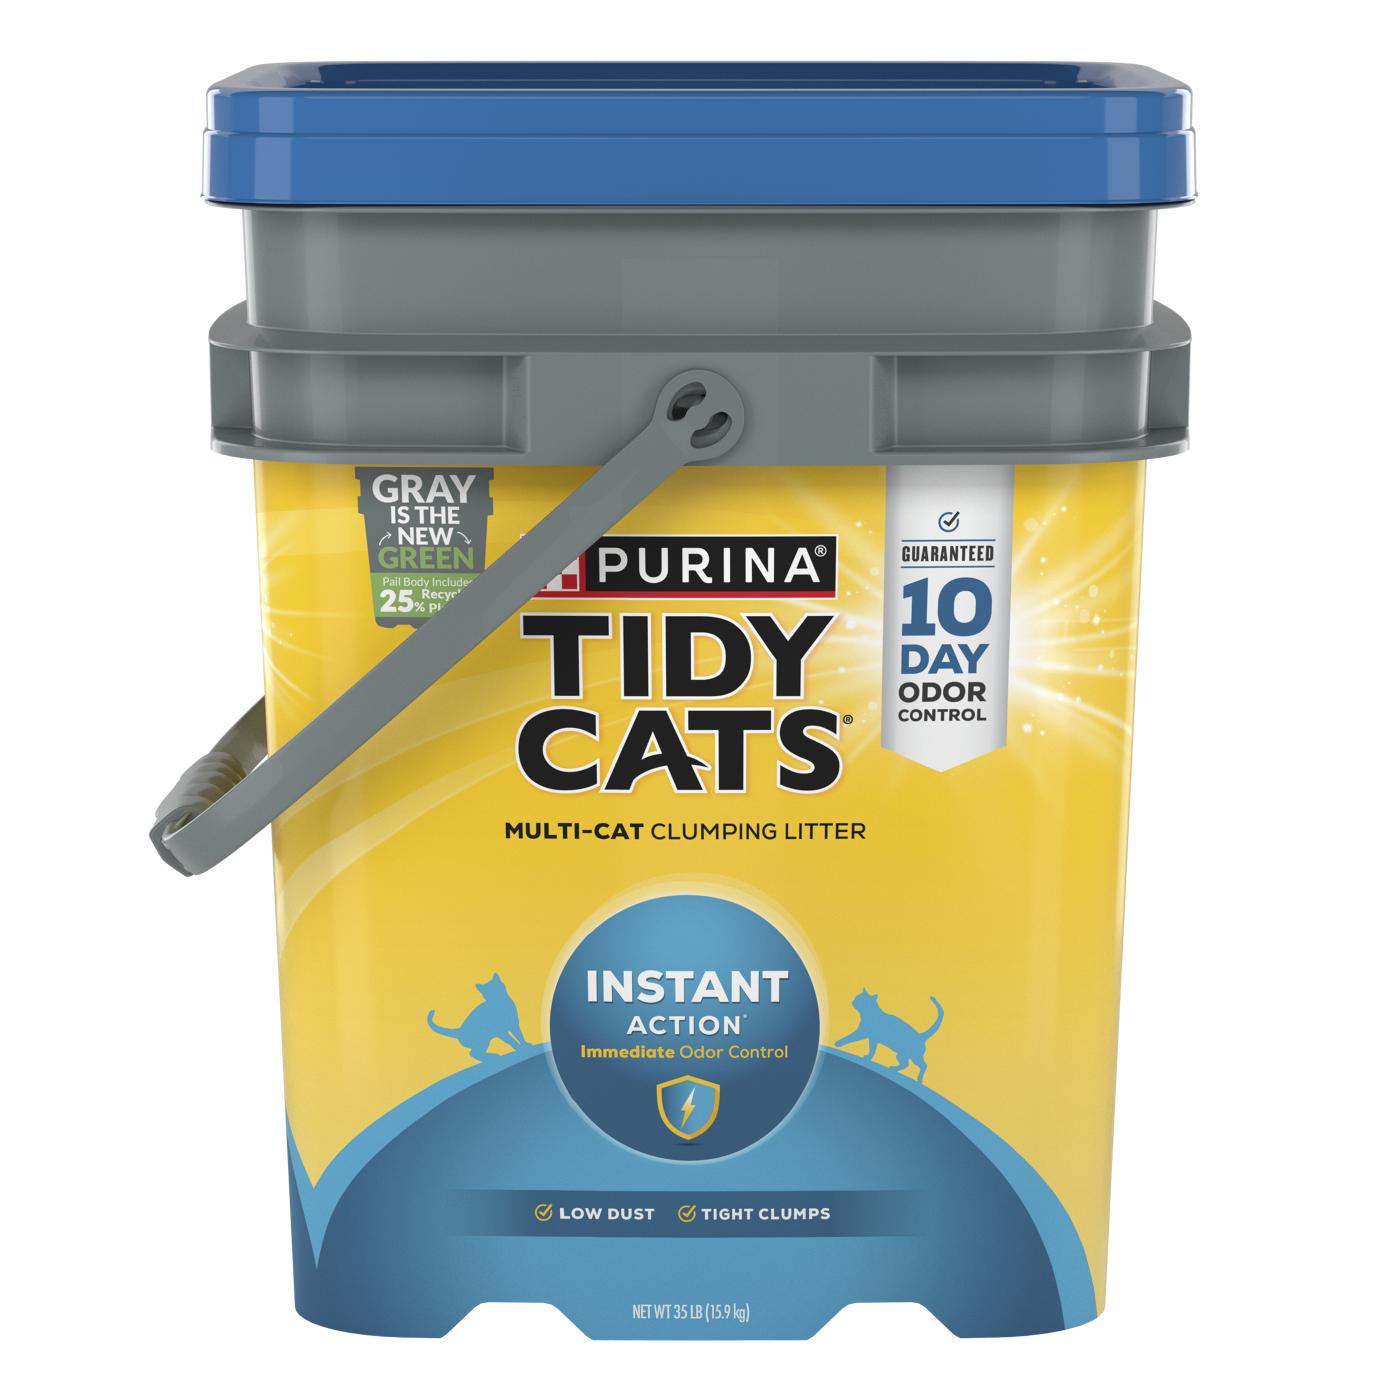 Tidy Cats Purina Tidy Cats Clumping Cat Litter, Instant Action Multi Cat Litter; image 1 of 3